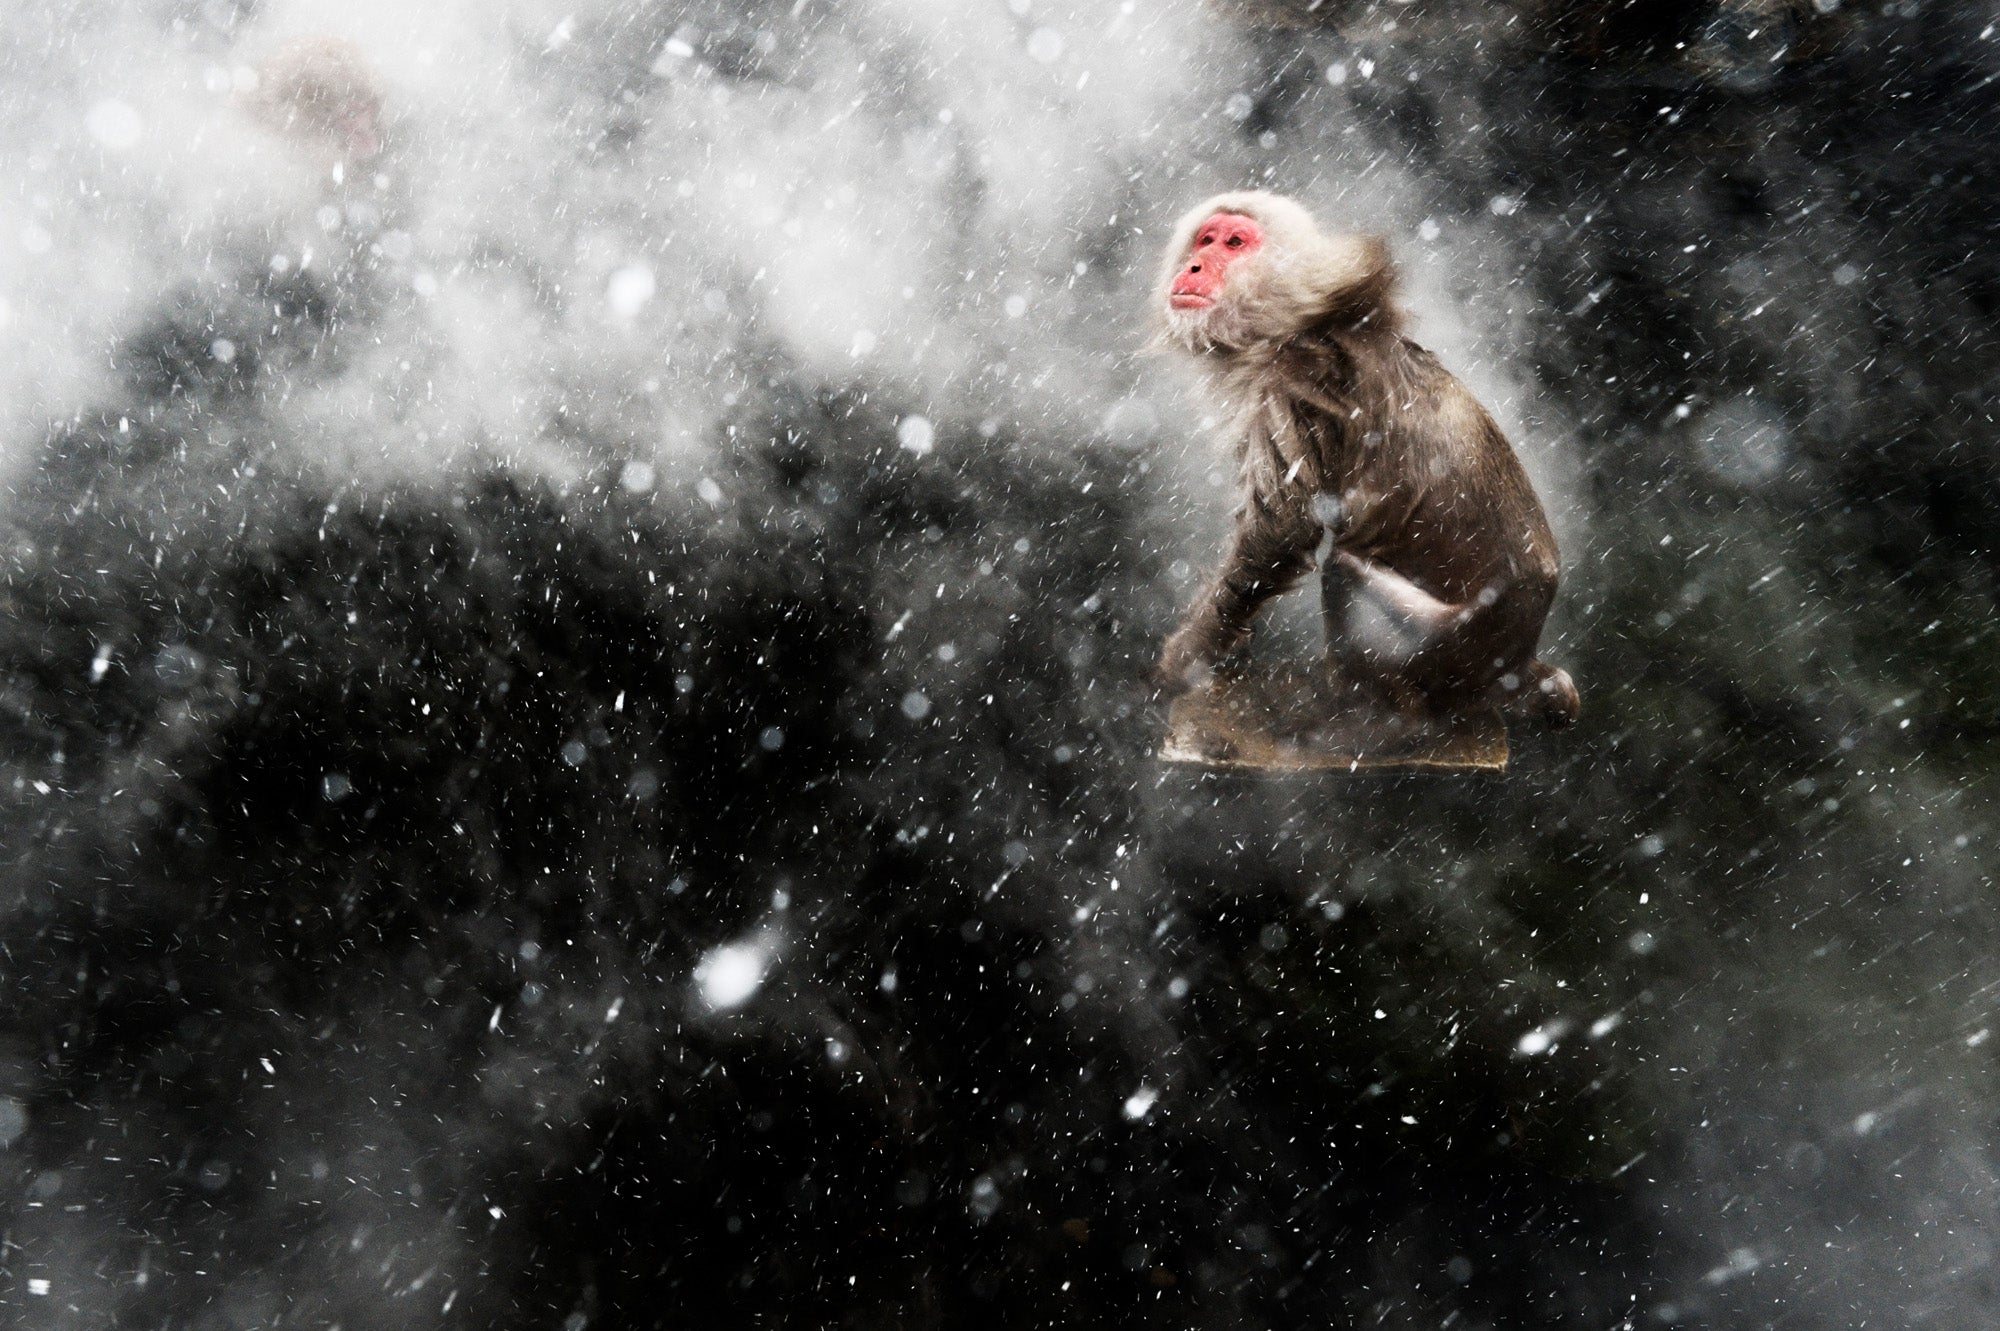 During a blizzard in Joshin’etsukogen National Park, on the island of Honshu, a Japanese macaque shakes off snow and water drops while resting on a rock that’s poking out of a hot spring.